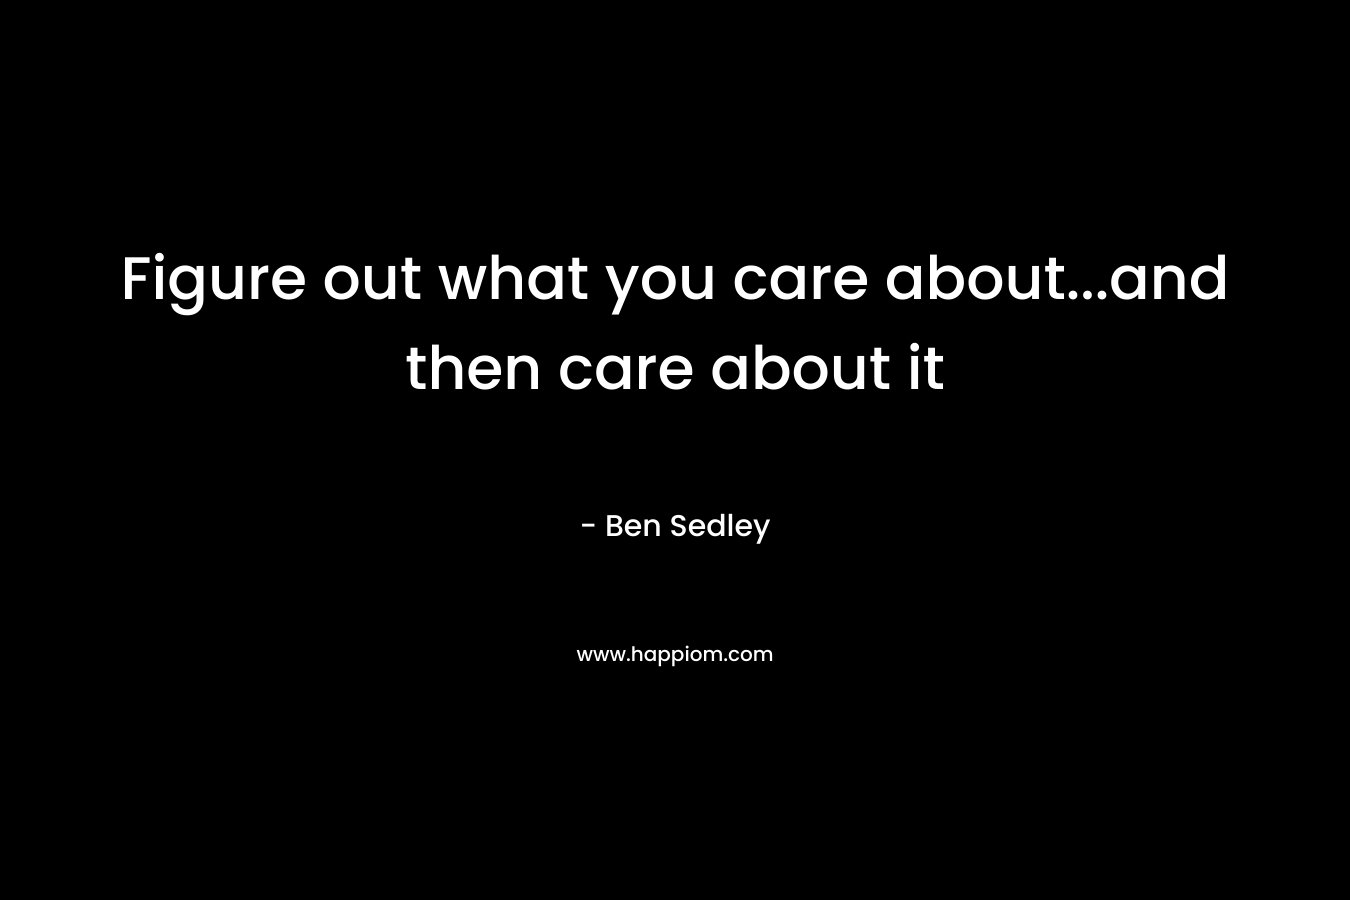 Figure out what you care about...and then care about it